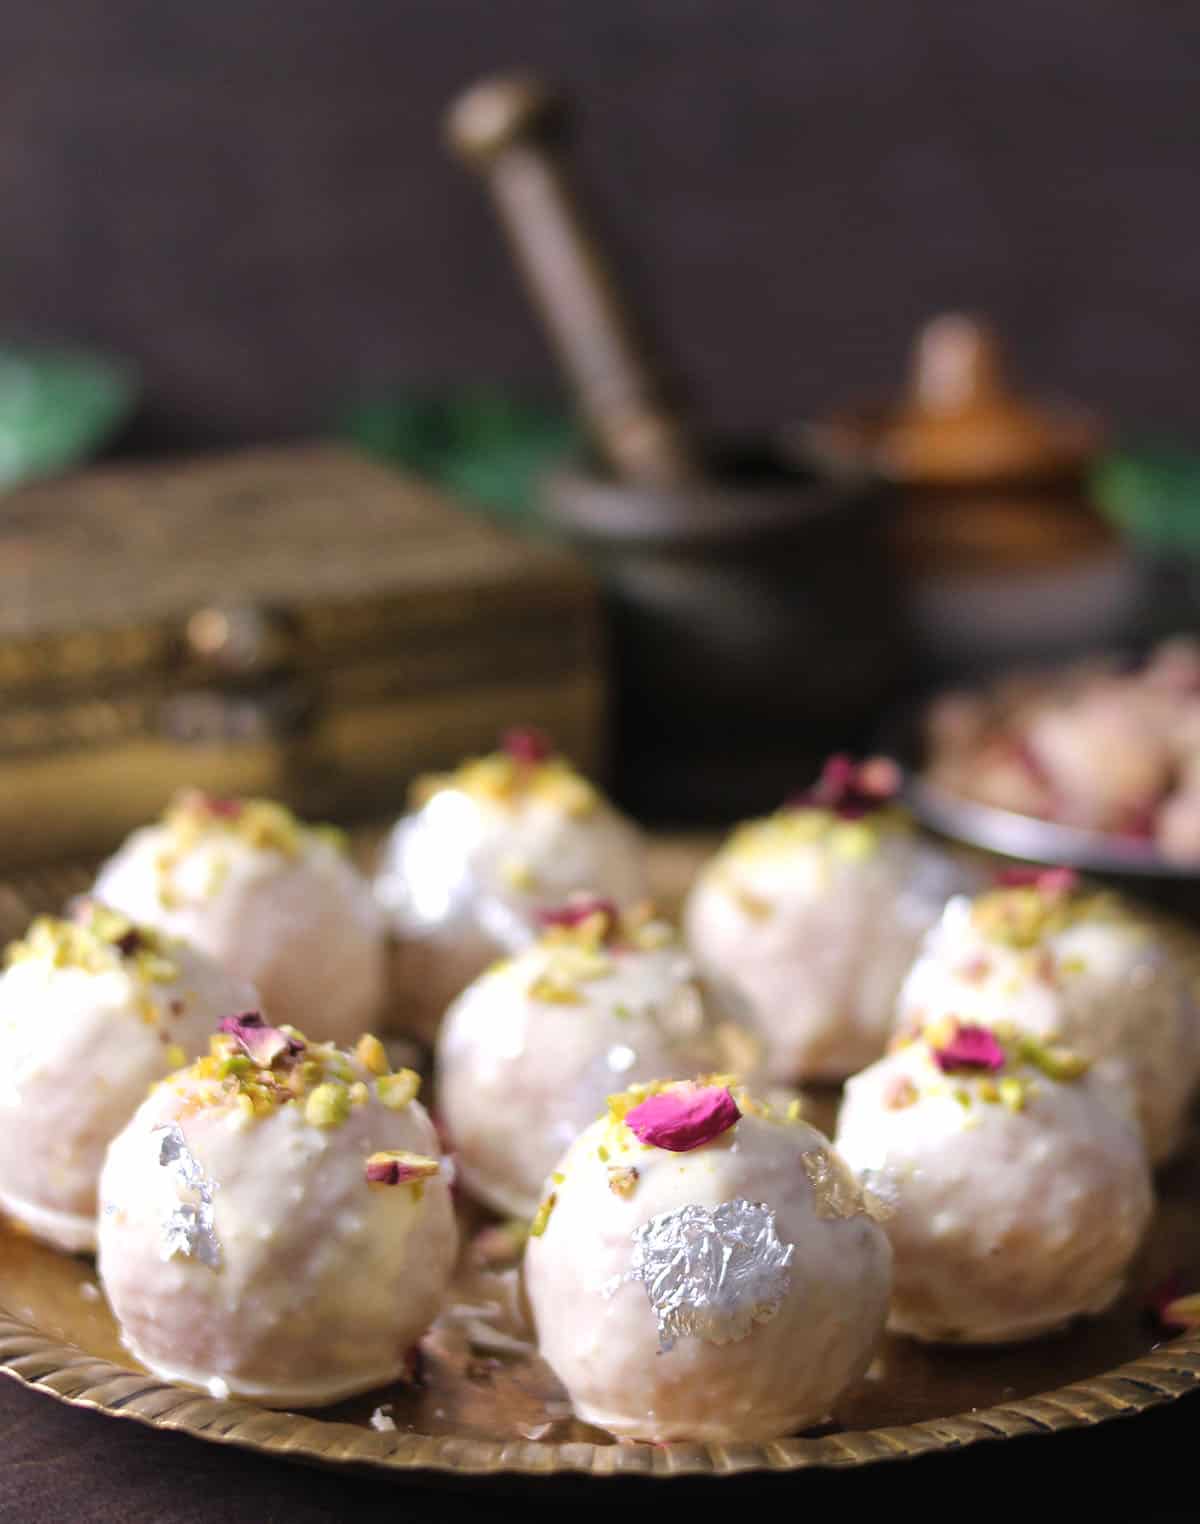 Motichoor Ladoo Truffles with gift box in background, special Indian dessert